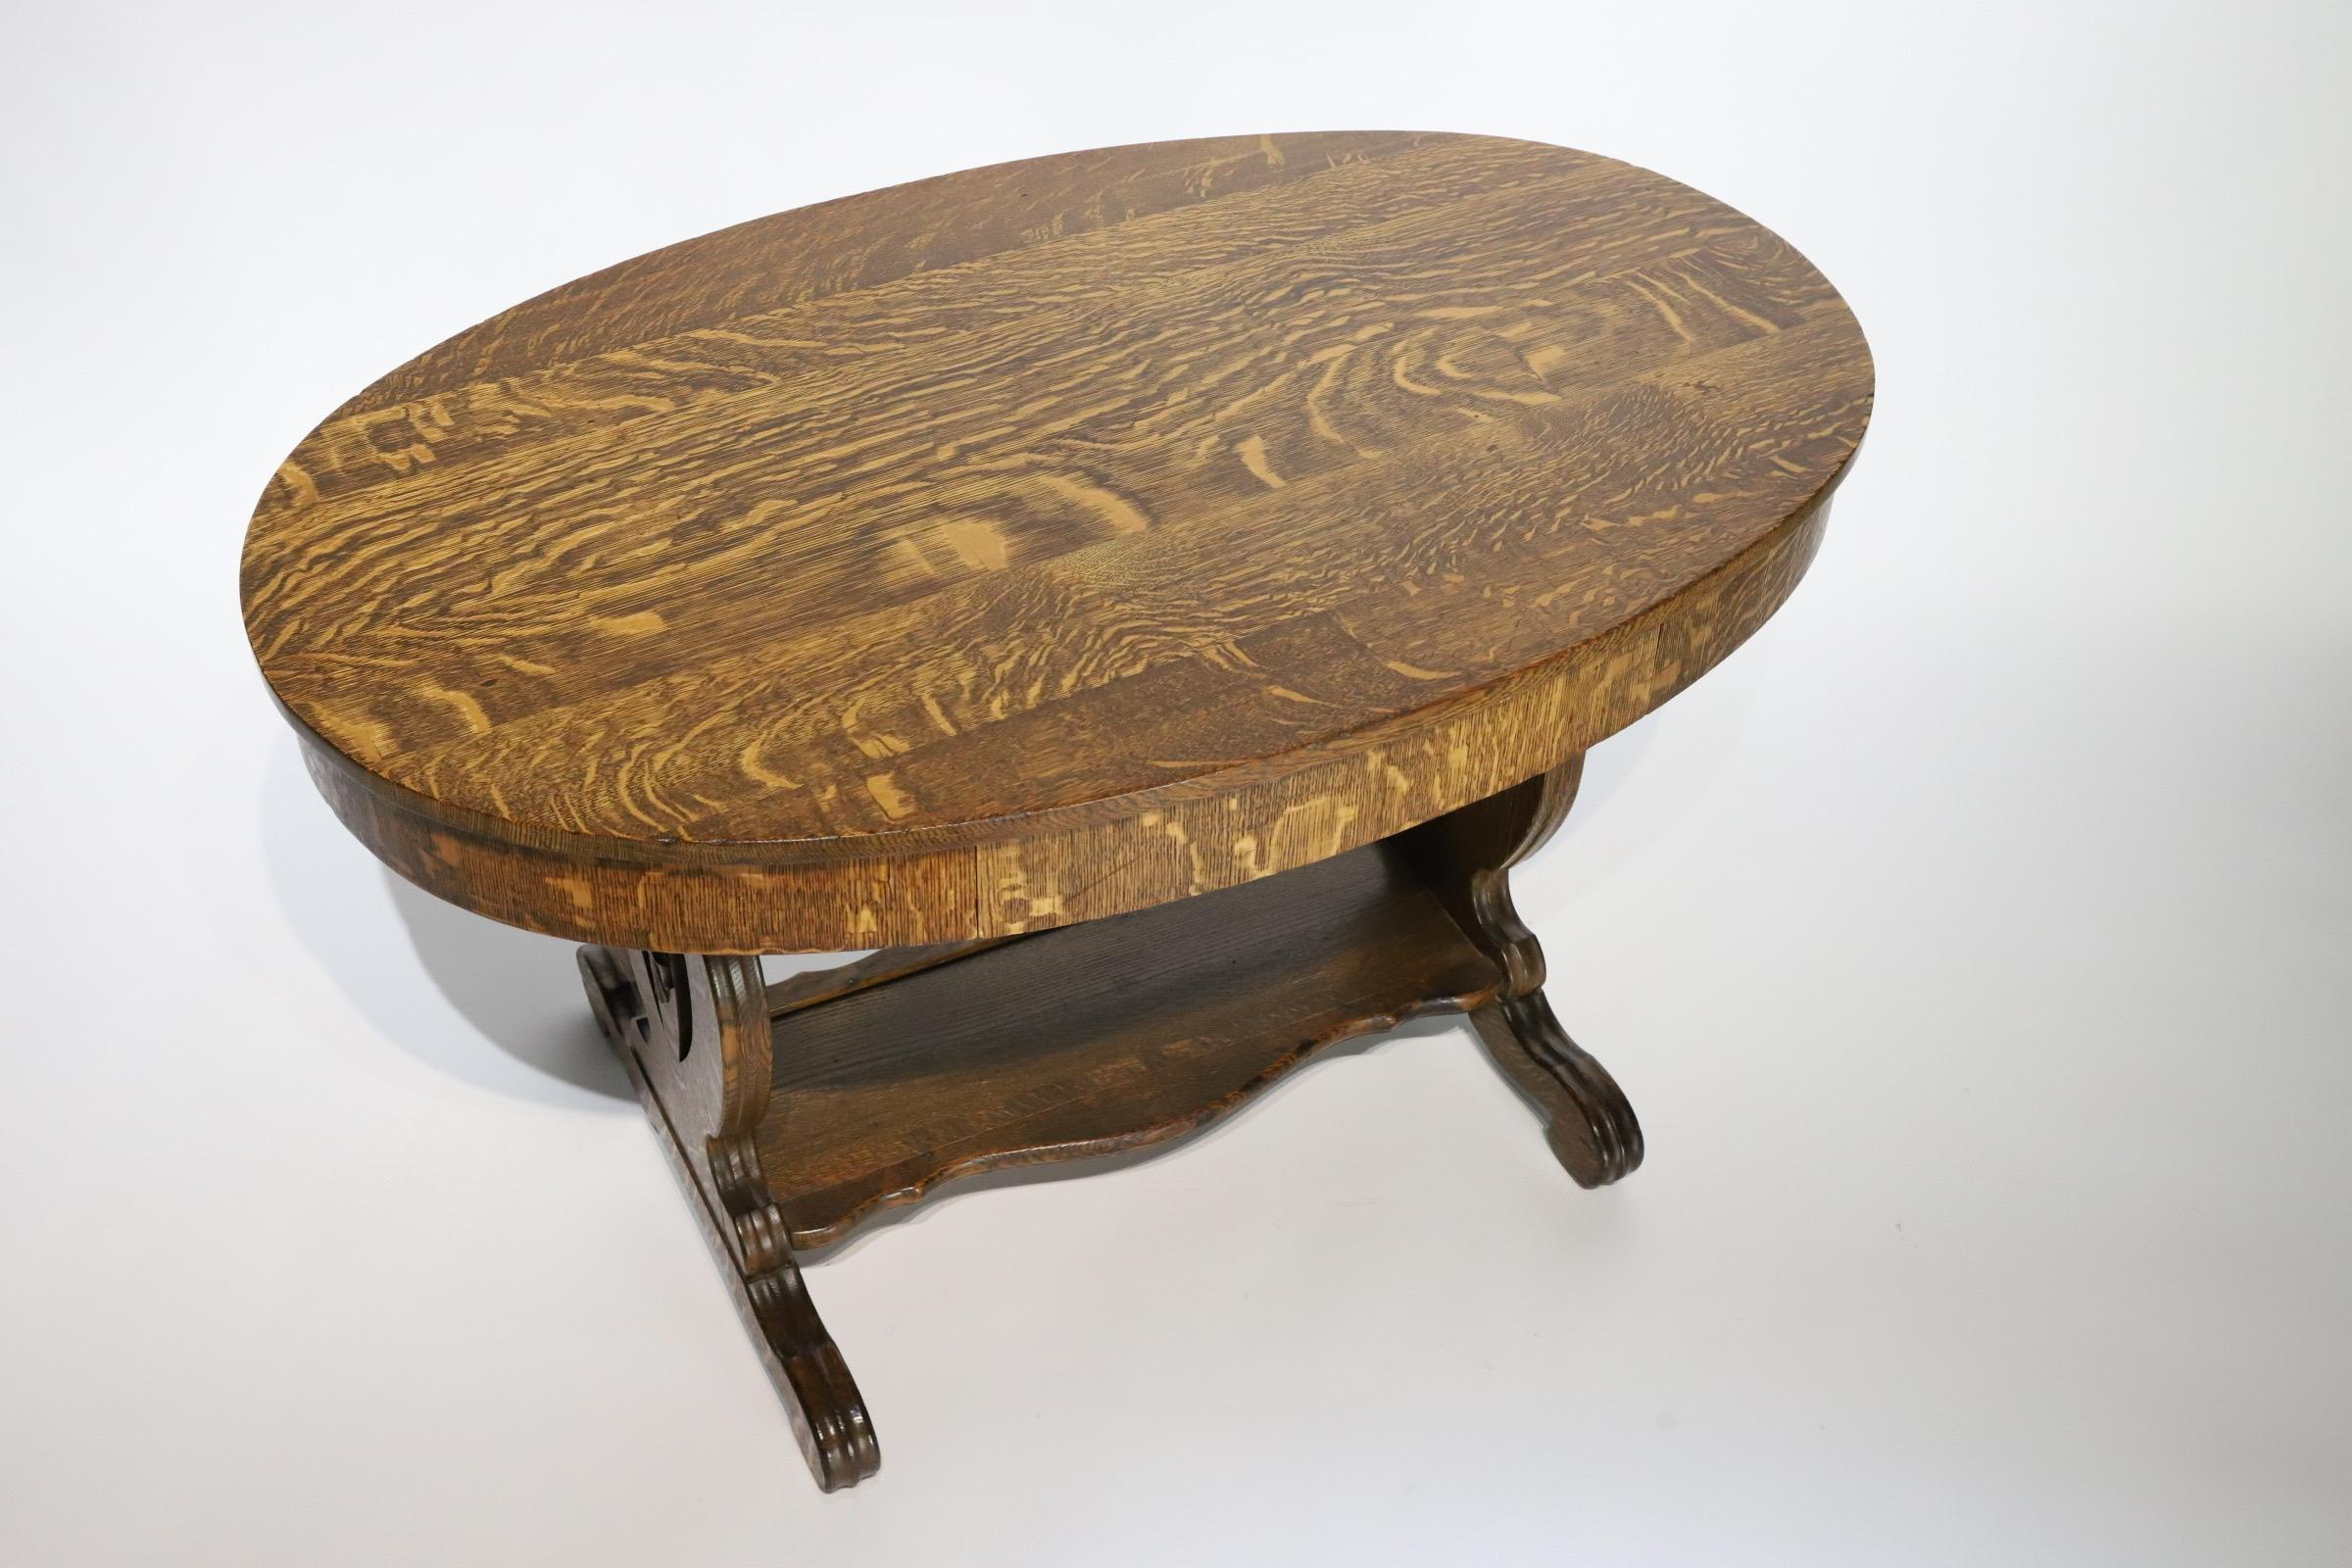 Stunning oval quarter sawn oak library table with sleek hidden drawer. Would make for a wonderful entry table or small writing desk.